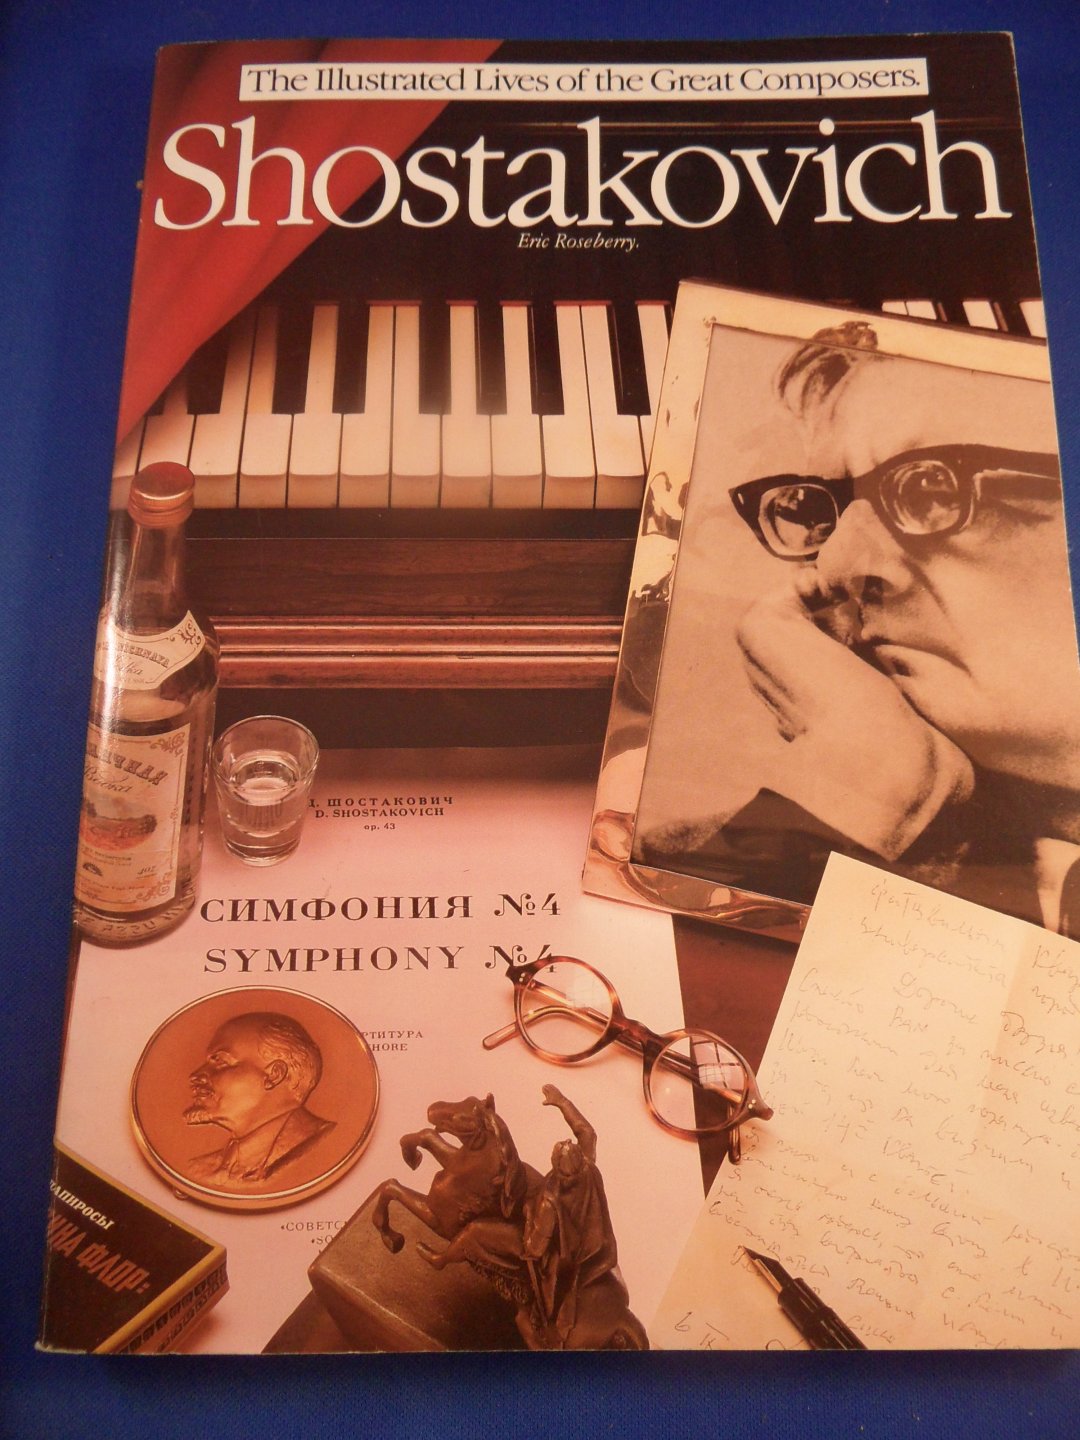 Roseberry, Eric - Shostakovich. The illustrated lives of the Great Composers